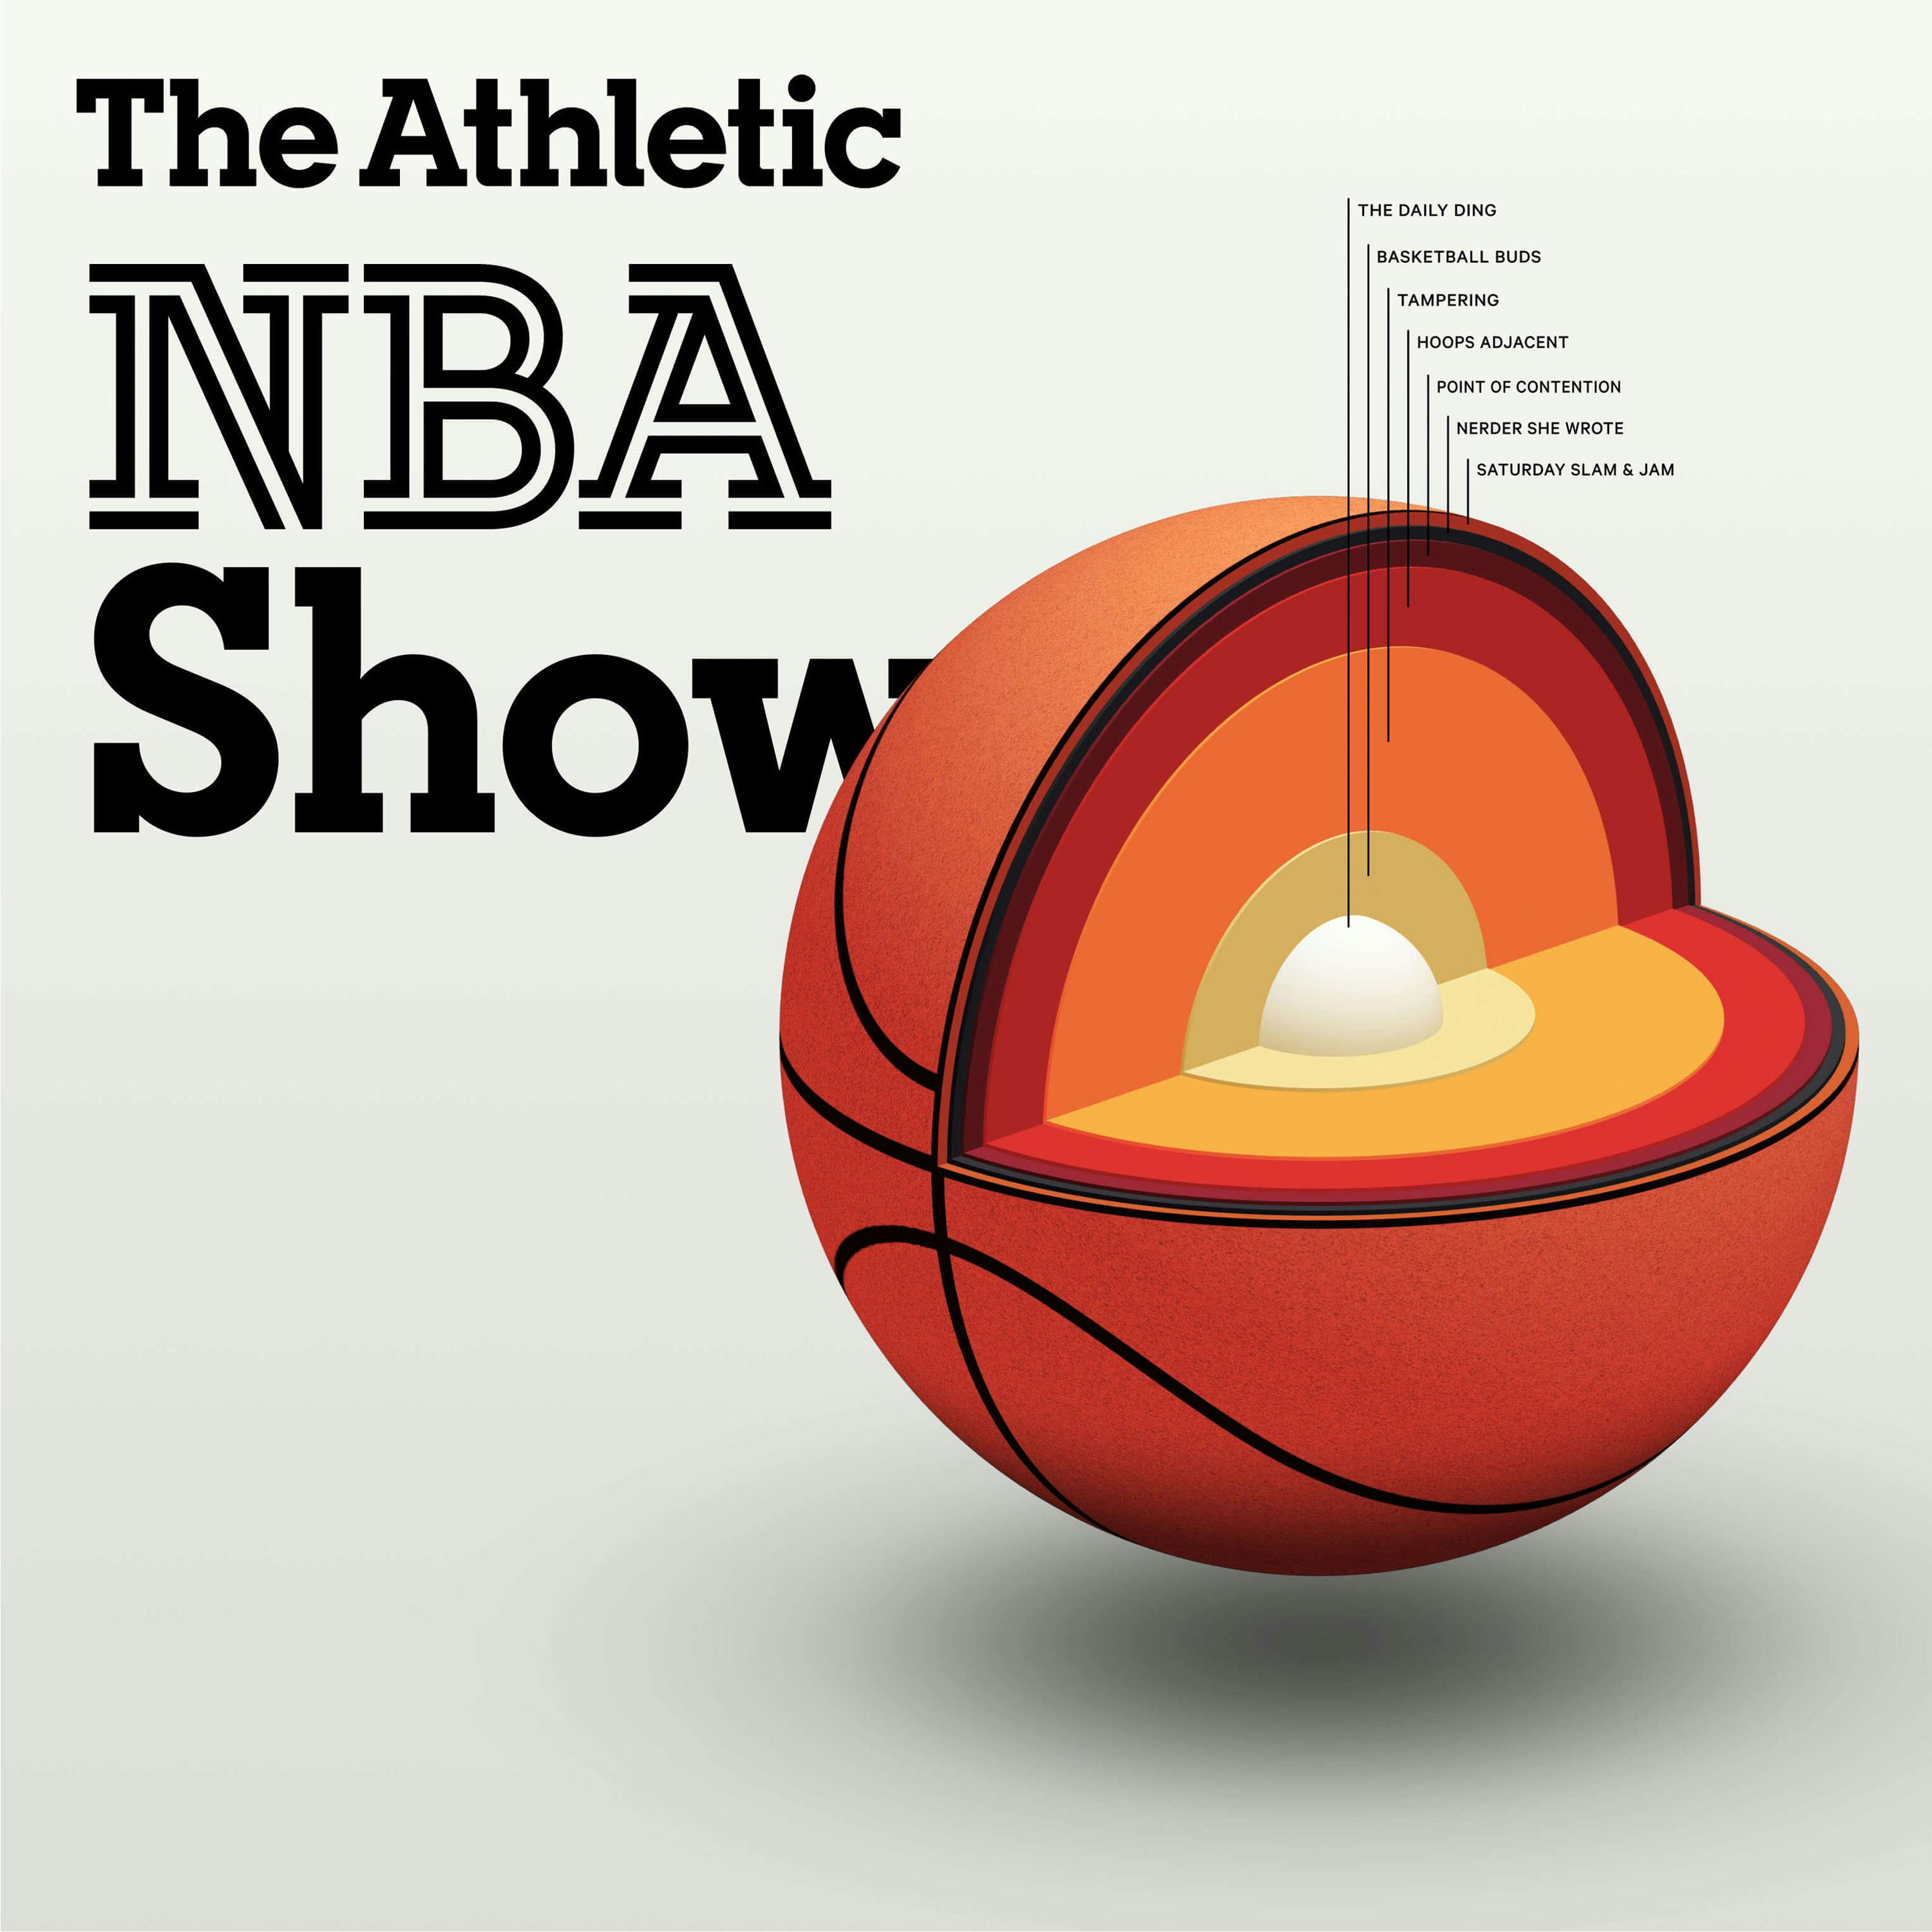 Bob Myers is OUT + NBA Finals Preview with Nekias Duncan